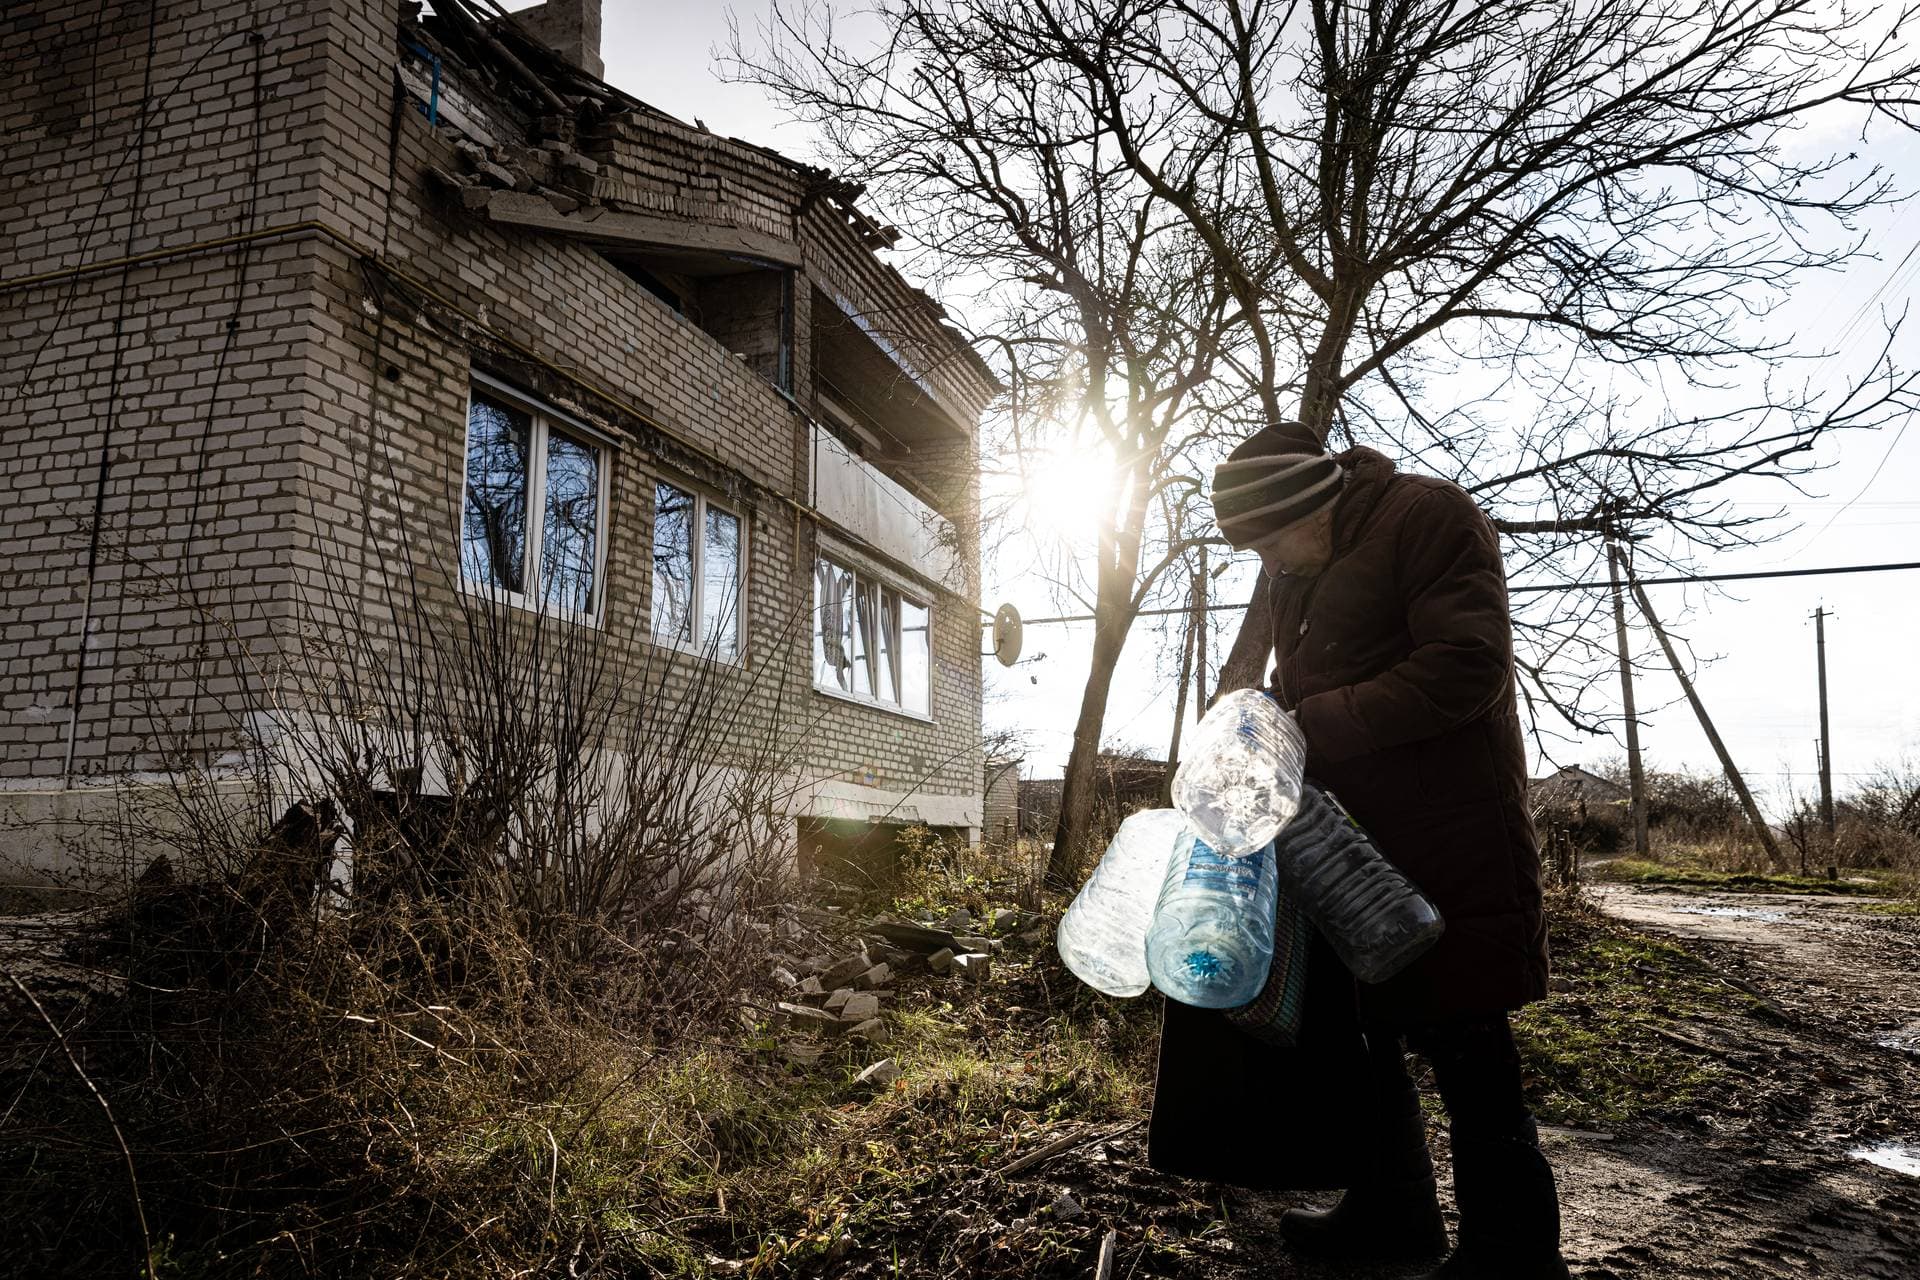 Nadezhda Vasilievna fetches water after the war in Ukraine cut off water service in the village of Lazove